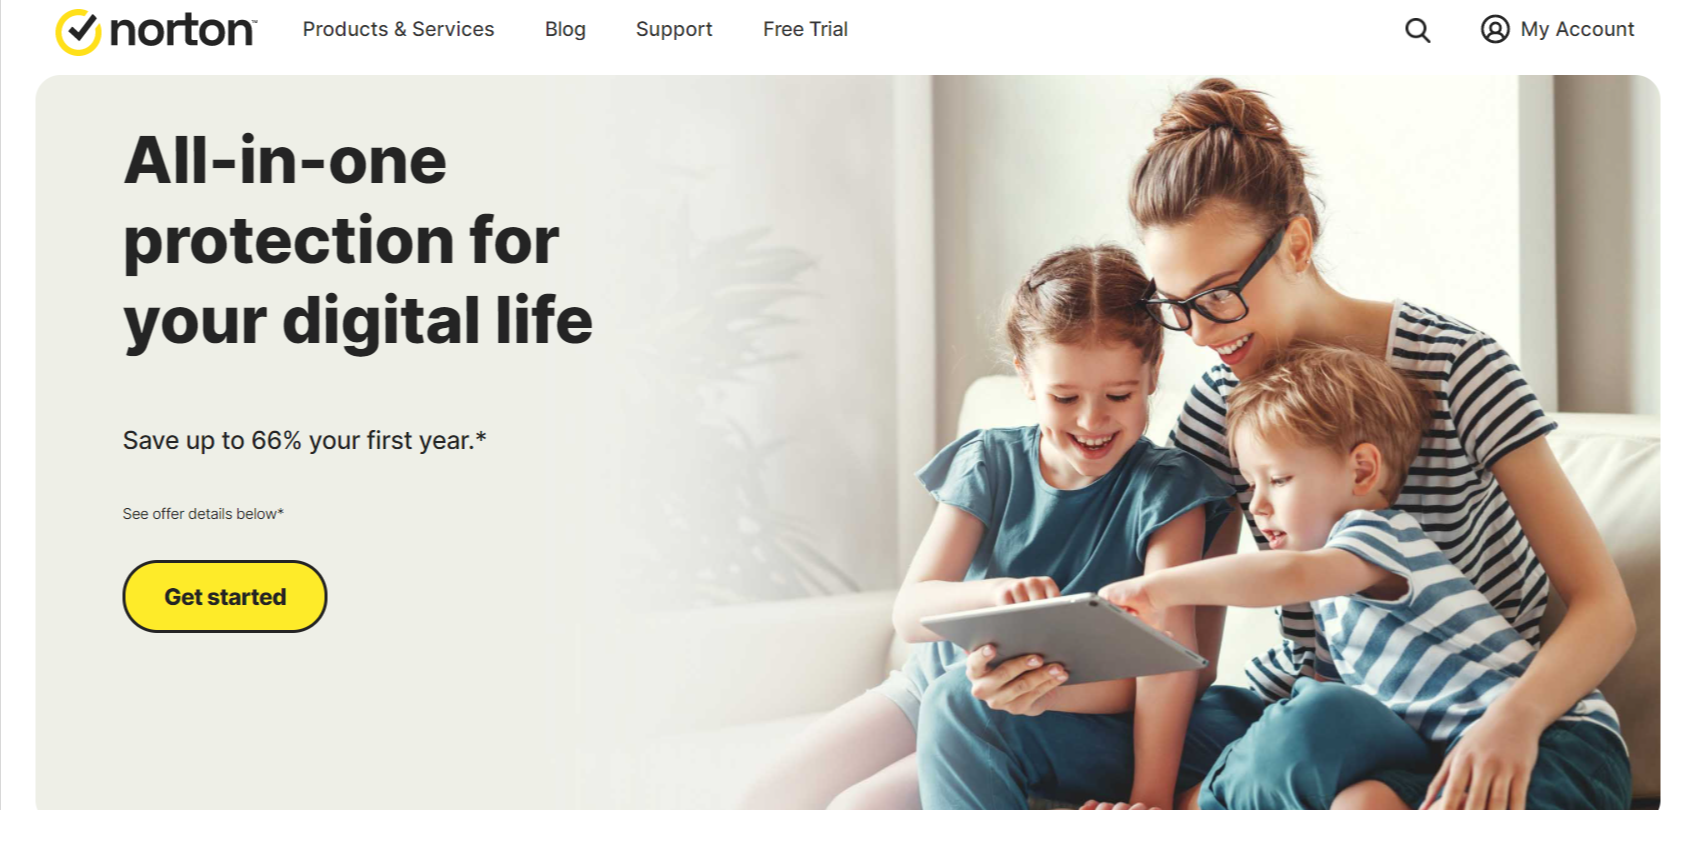 norton-all-in-one-family-parental-control-software